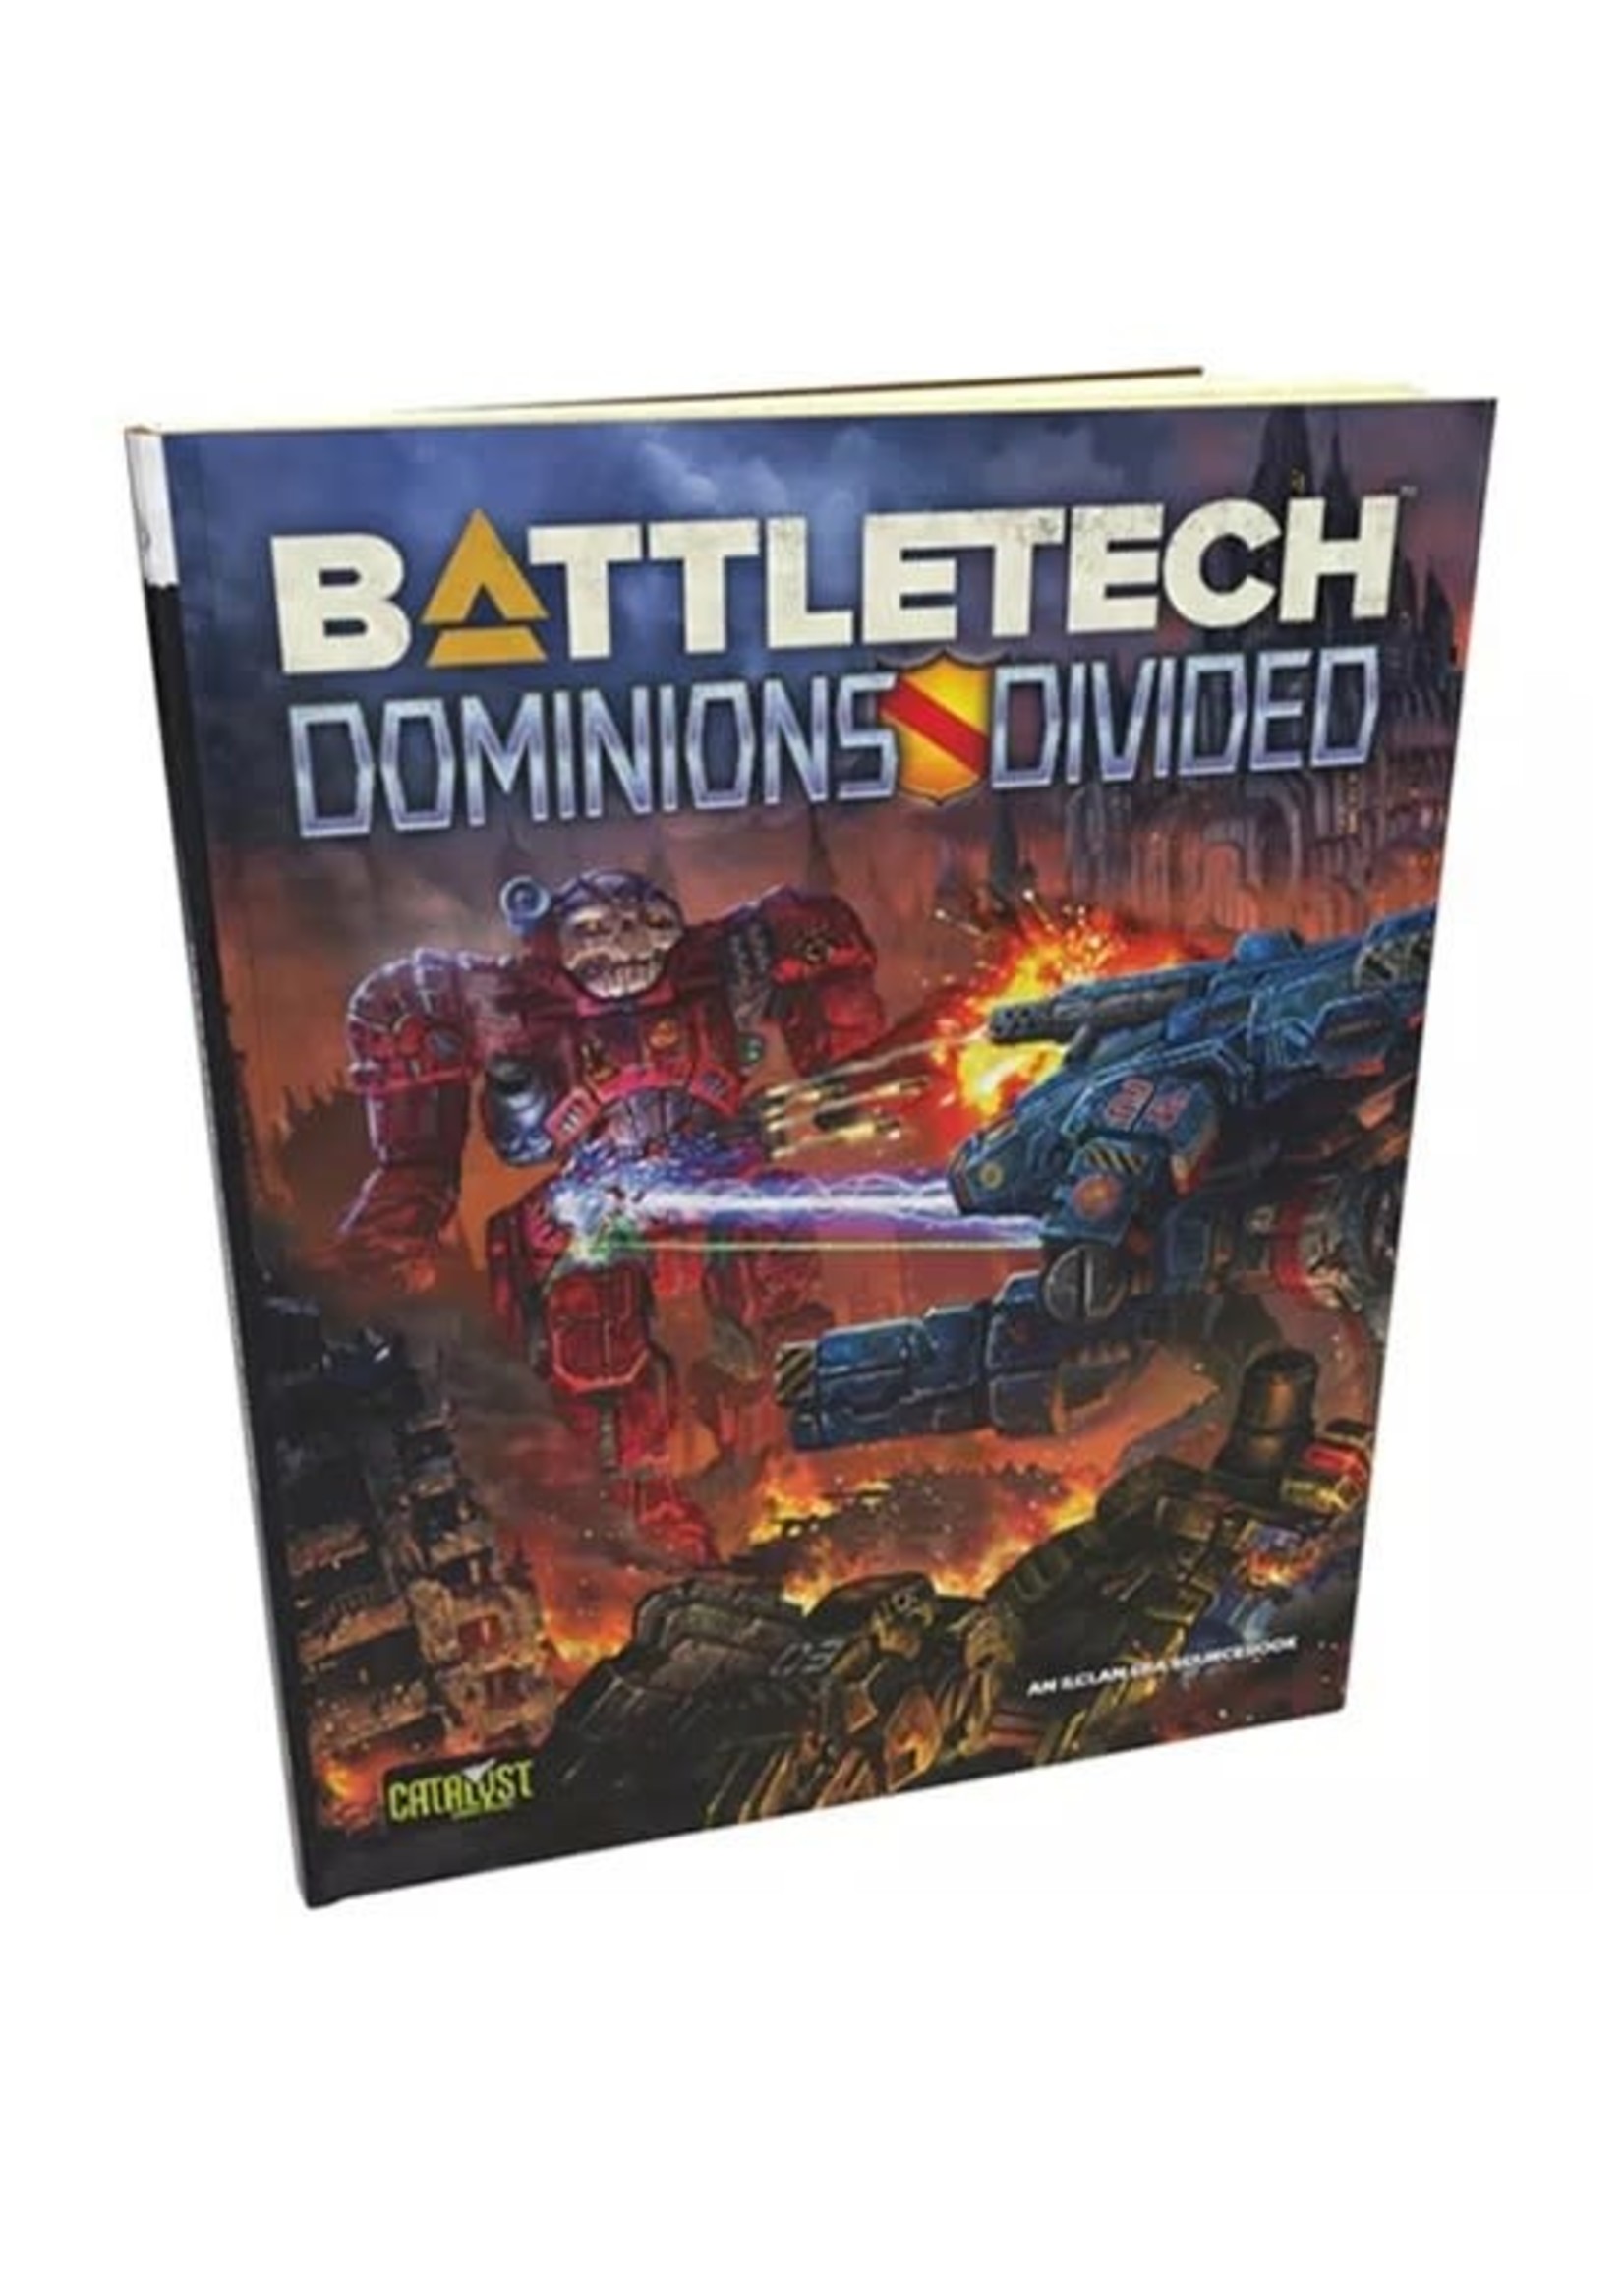 CATALYST GAME LABS BattleTech: Dominions Divided